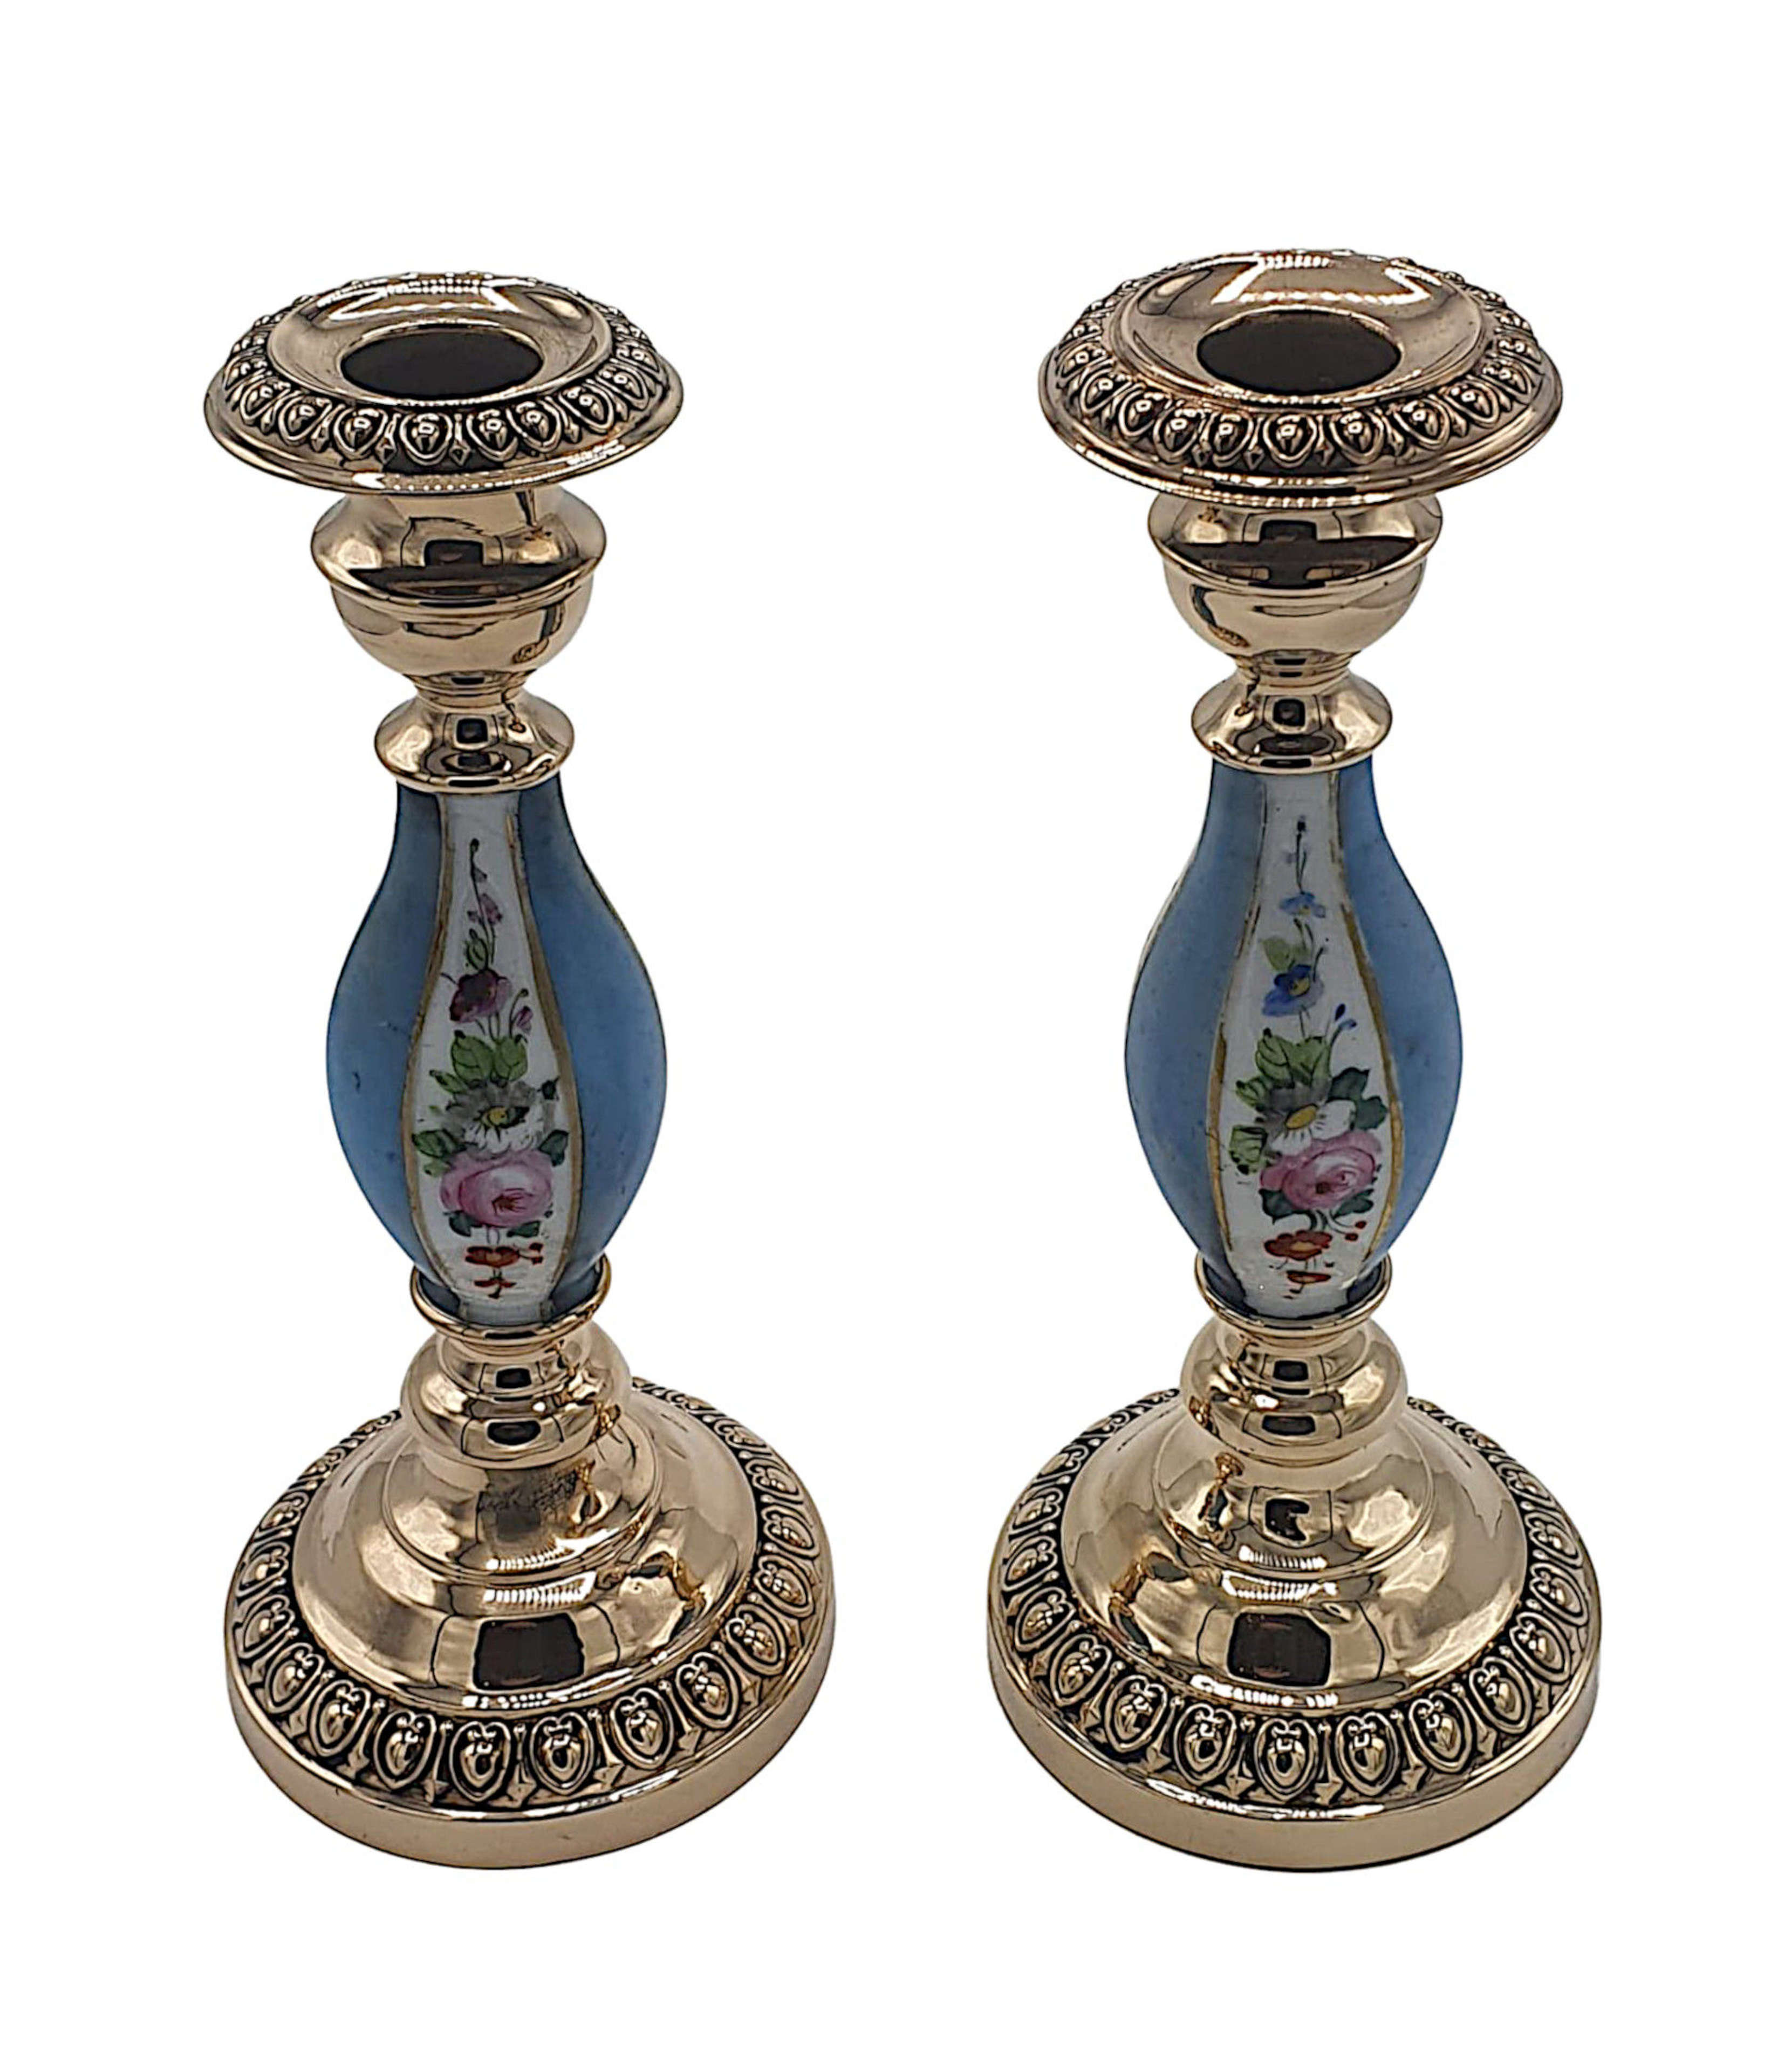 A Lovely Quality Pair of Edwardian Brass and Porcelain Candlesticks